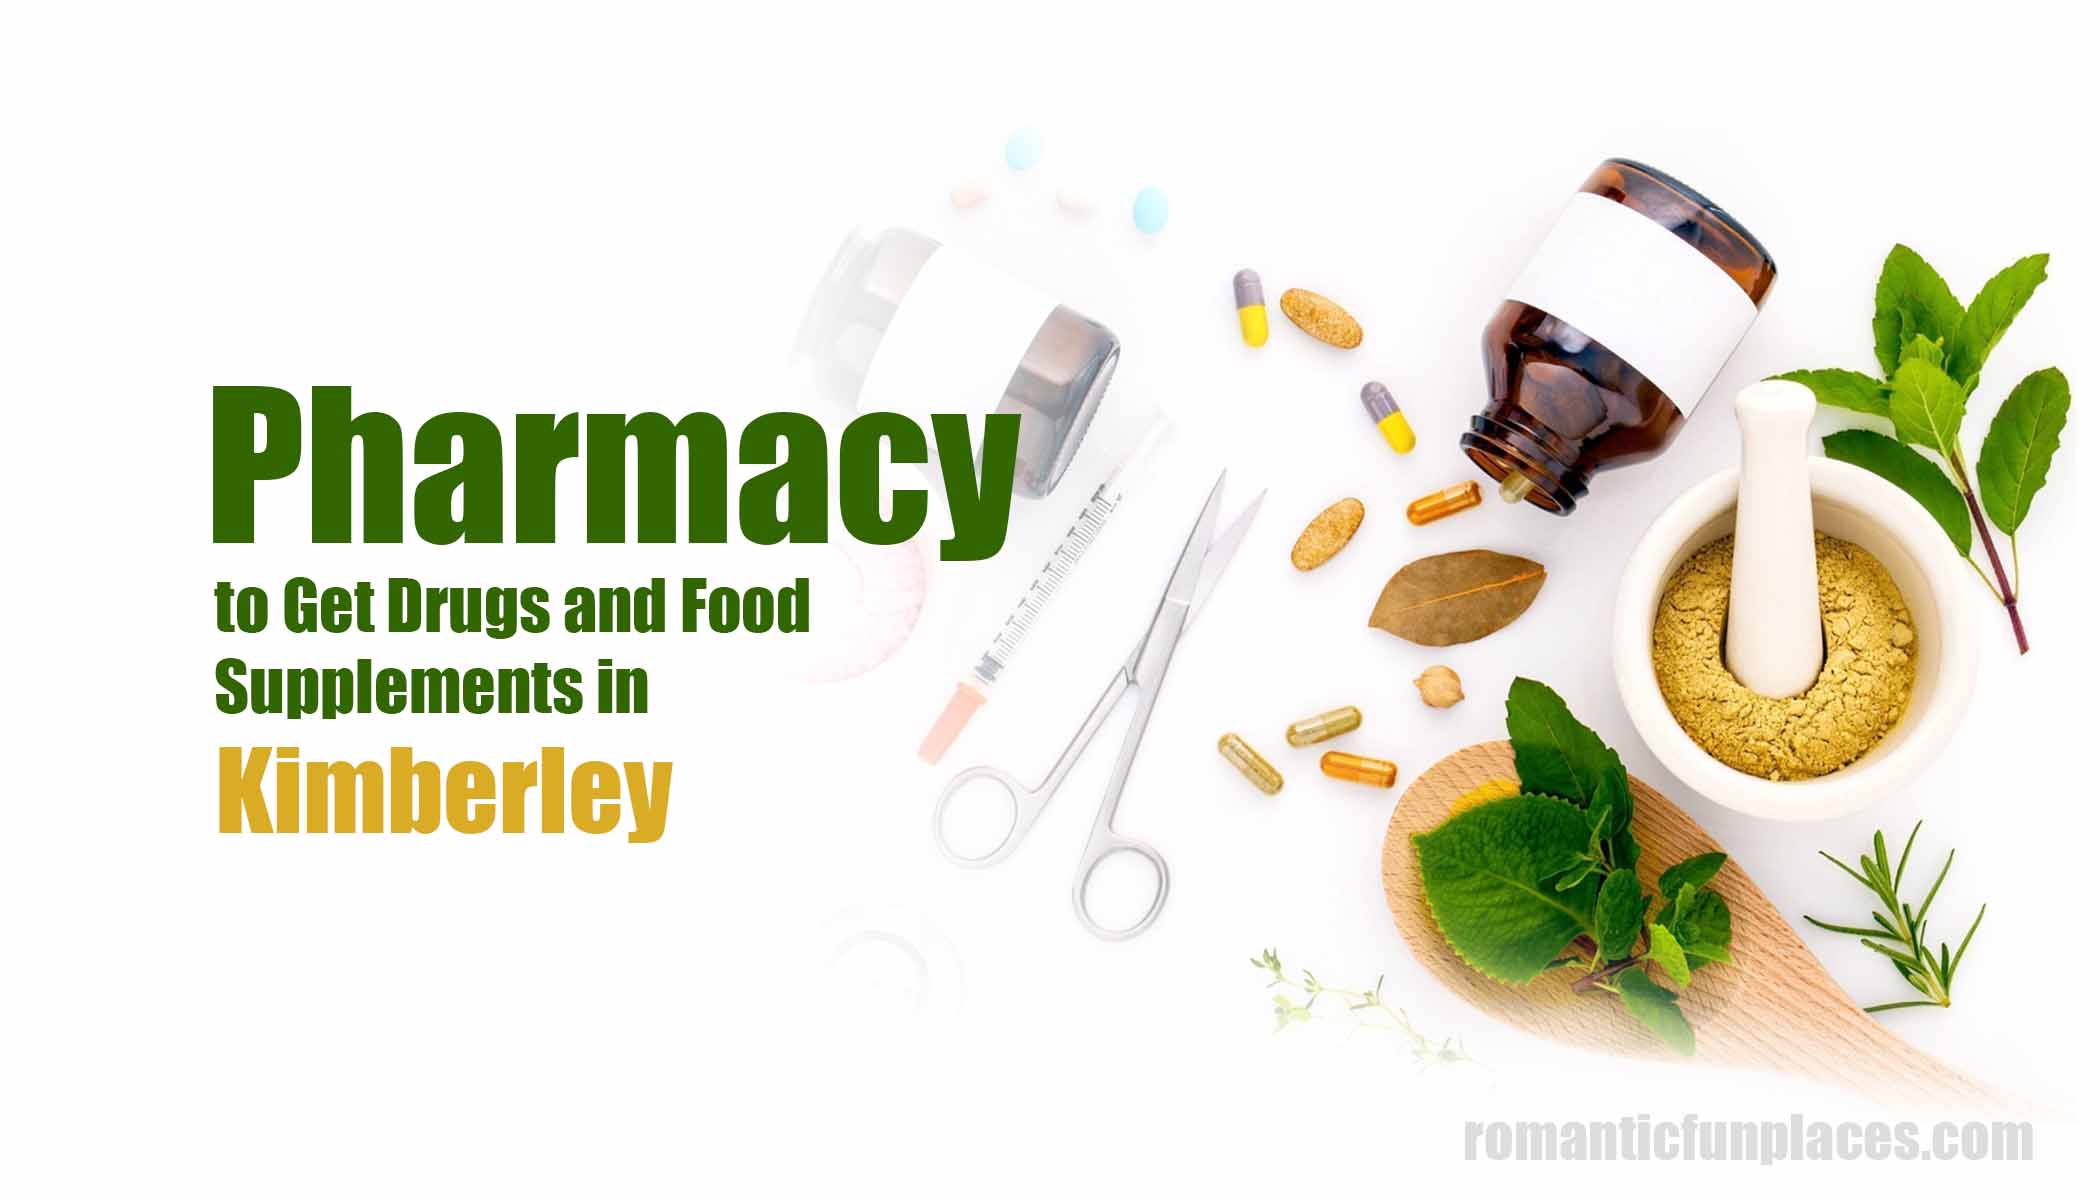 Pharmacy to Get Drugs and Food Supplements In Kimberley